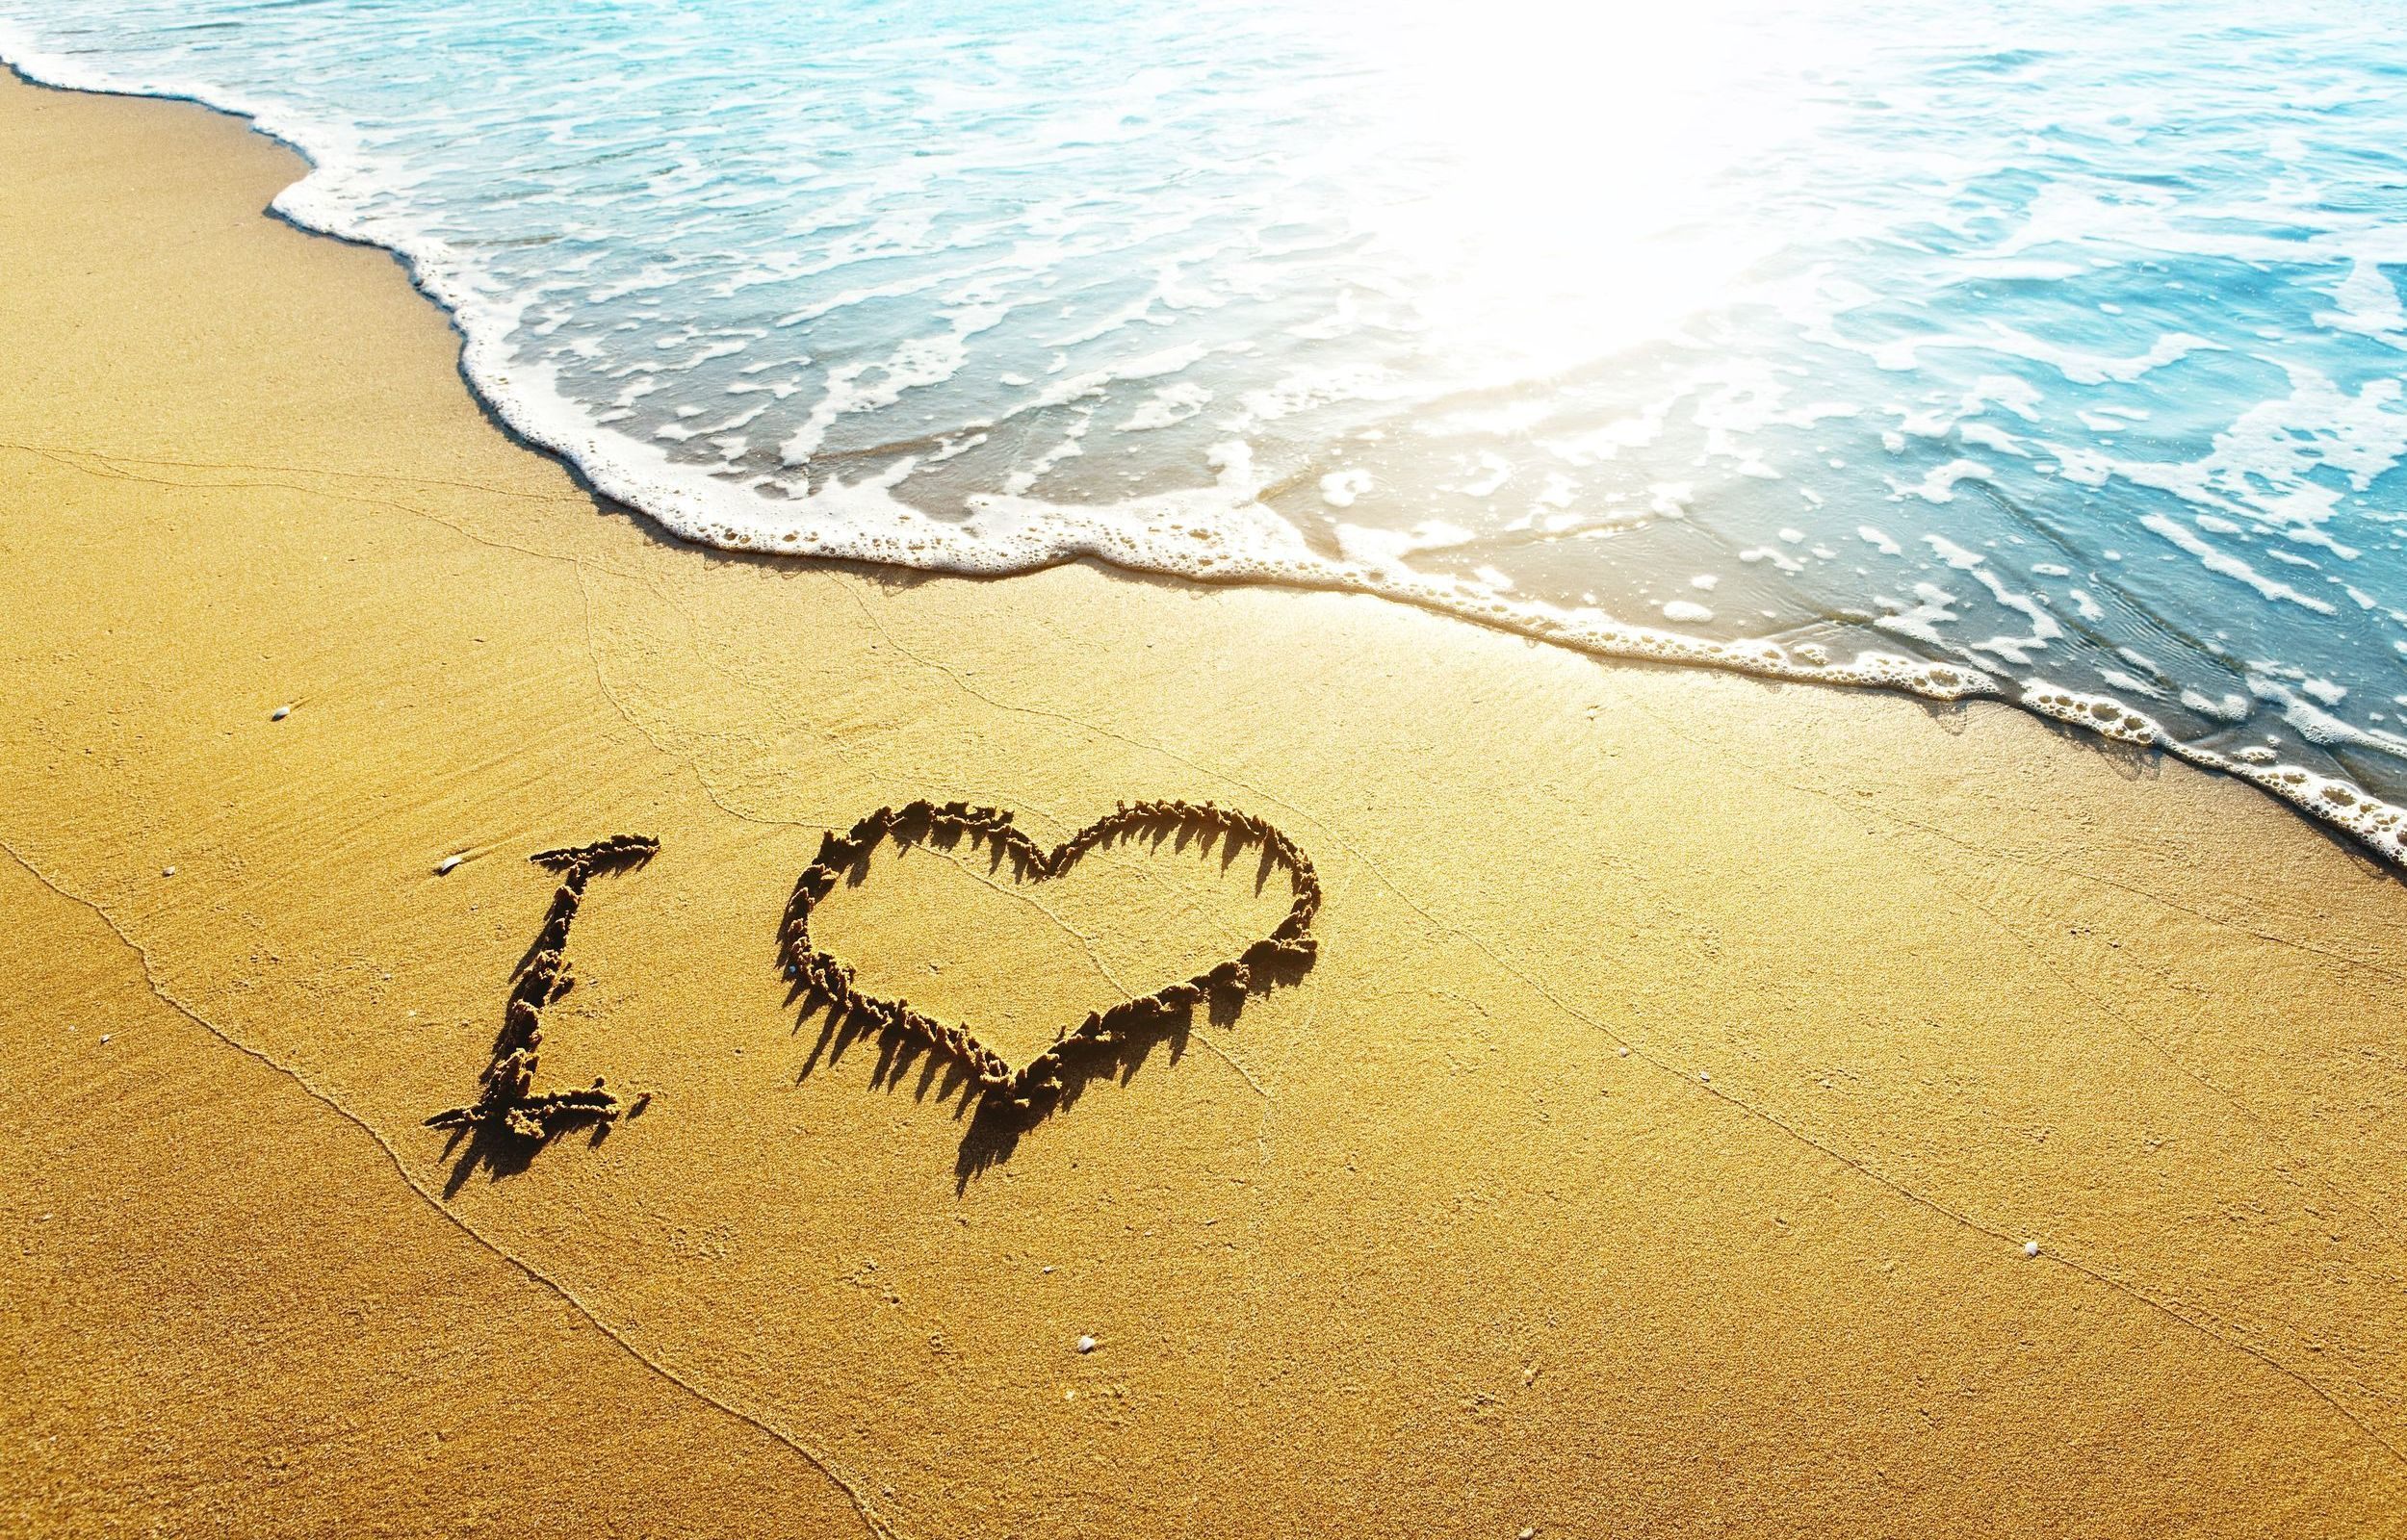 Love Beach: "I heart" in the sand at the surf